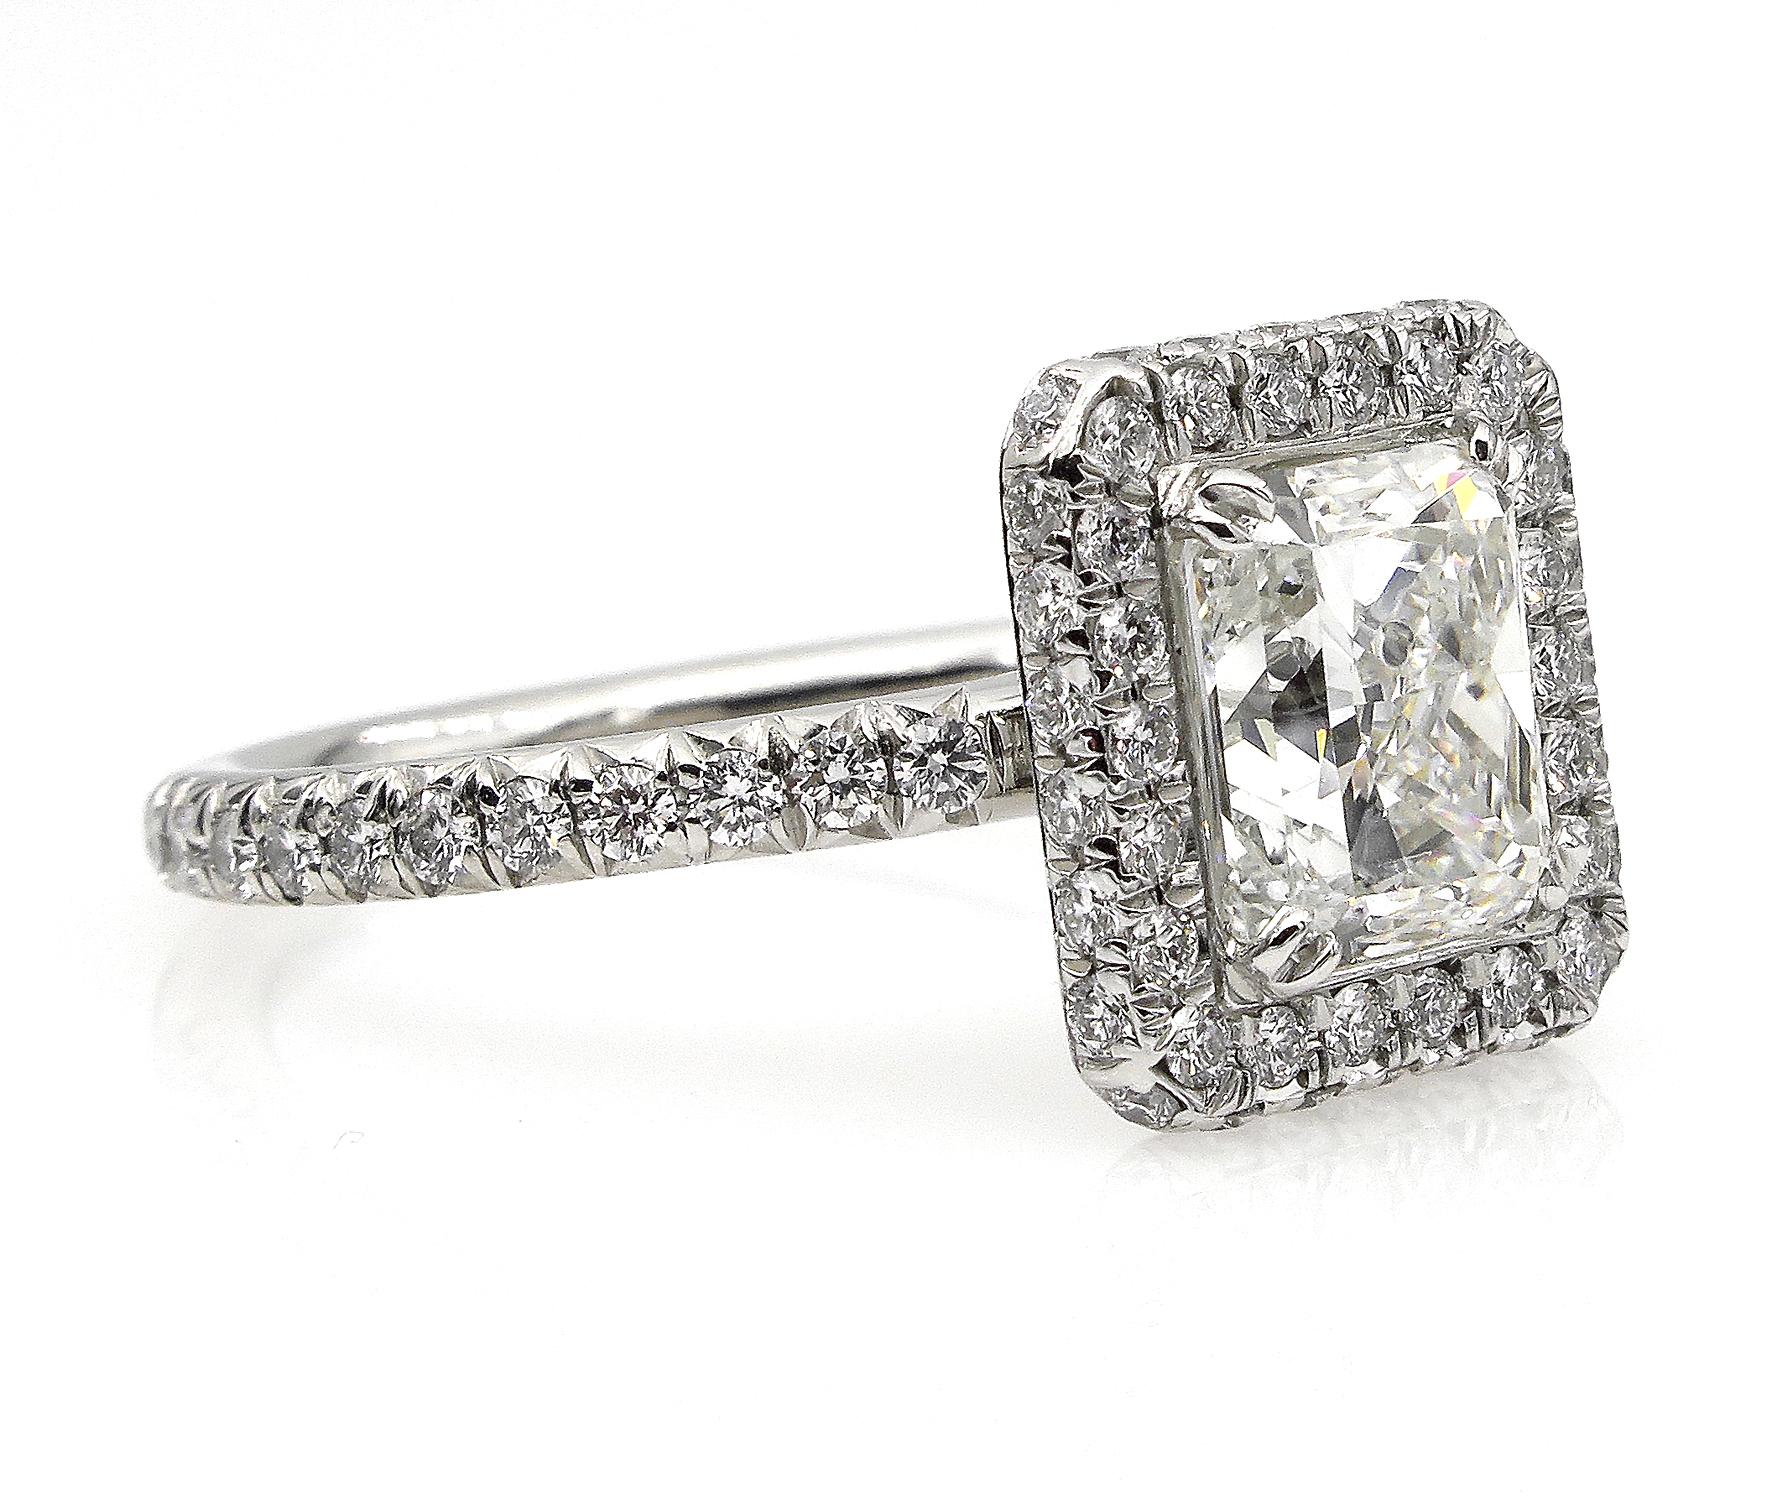 This Exquisite Diamond ring with an Radiant cut Center Diamond 2.02Ct I color SI2 clarity GIA CERTIFIED will take your breath away!
Great opportunity to own a 100% NATURAL NONE-treated, Great Quality diamond for an exceptional price! You can